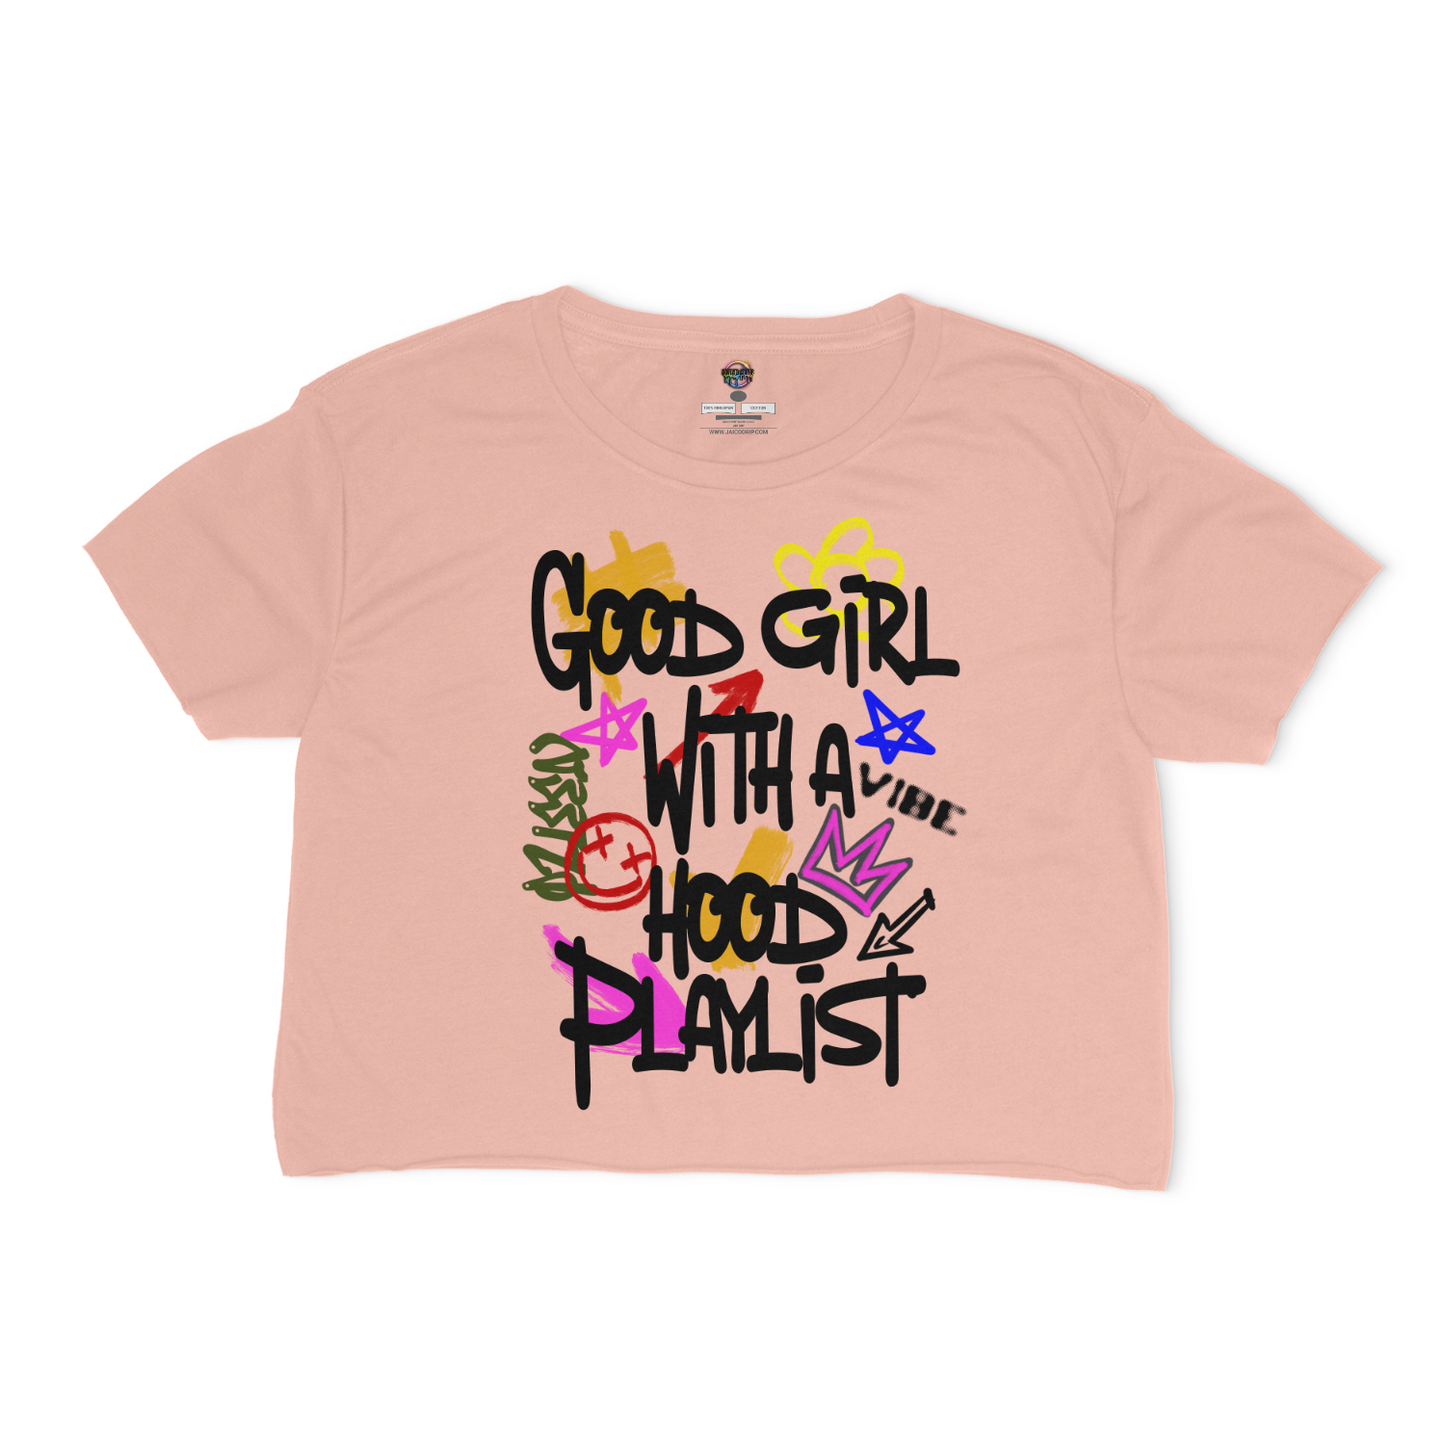 Good Girl With A Hood Playlist Relaxed Fit Cropped Graphic T-shirt